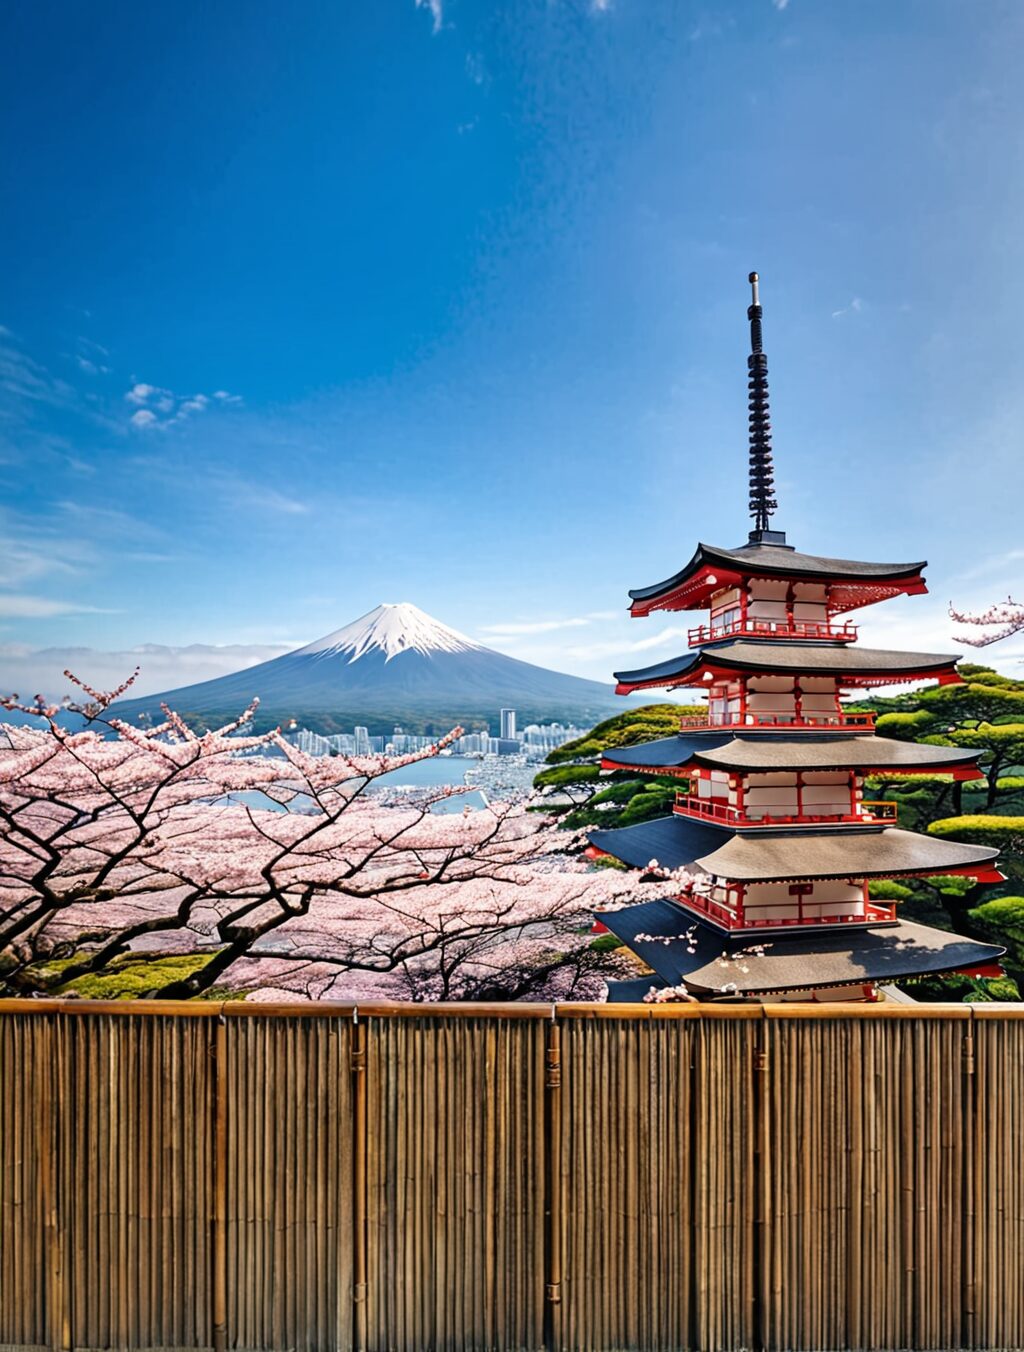 trips to japan for solo travellers